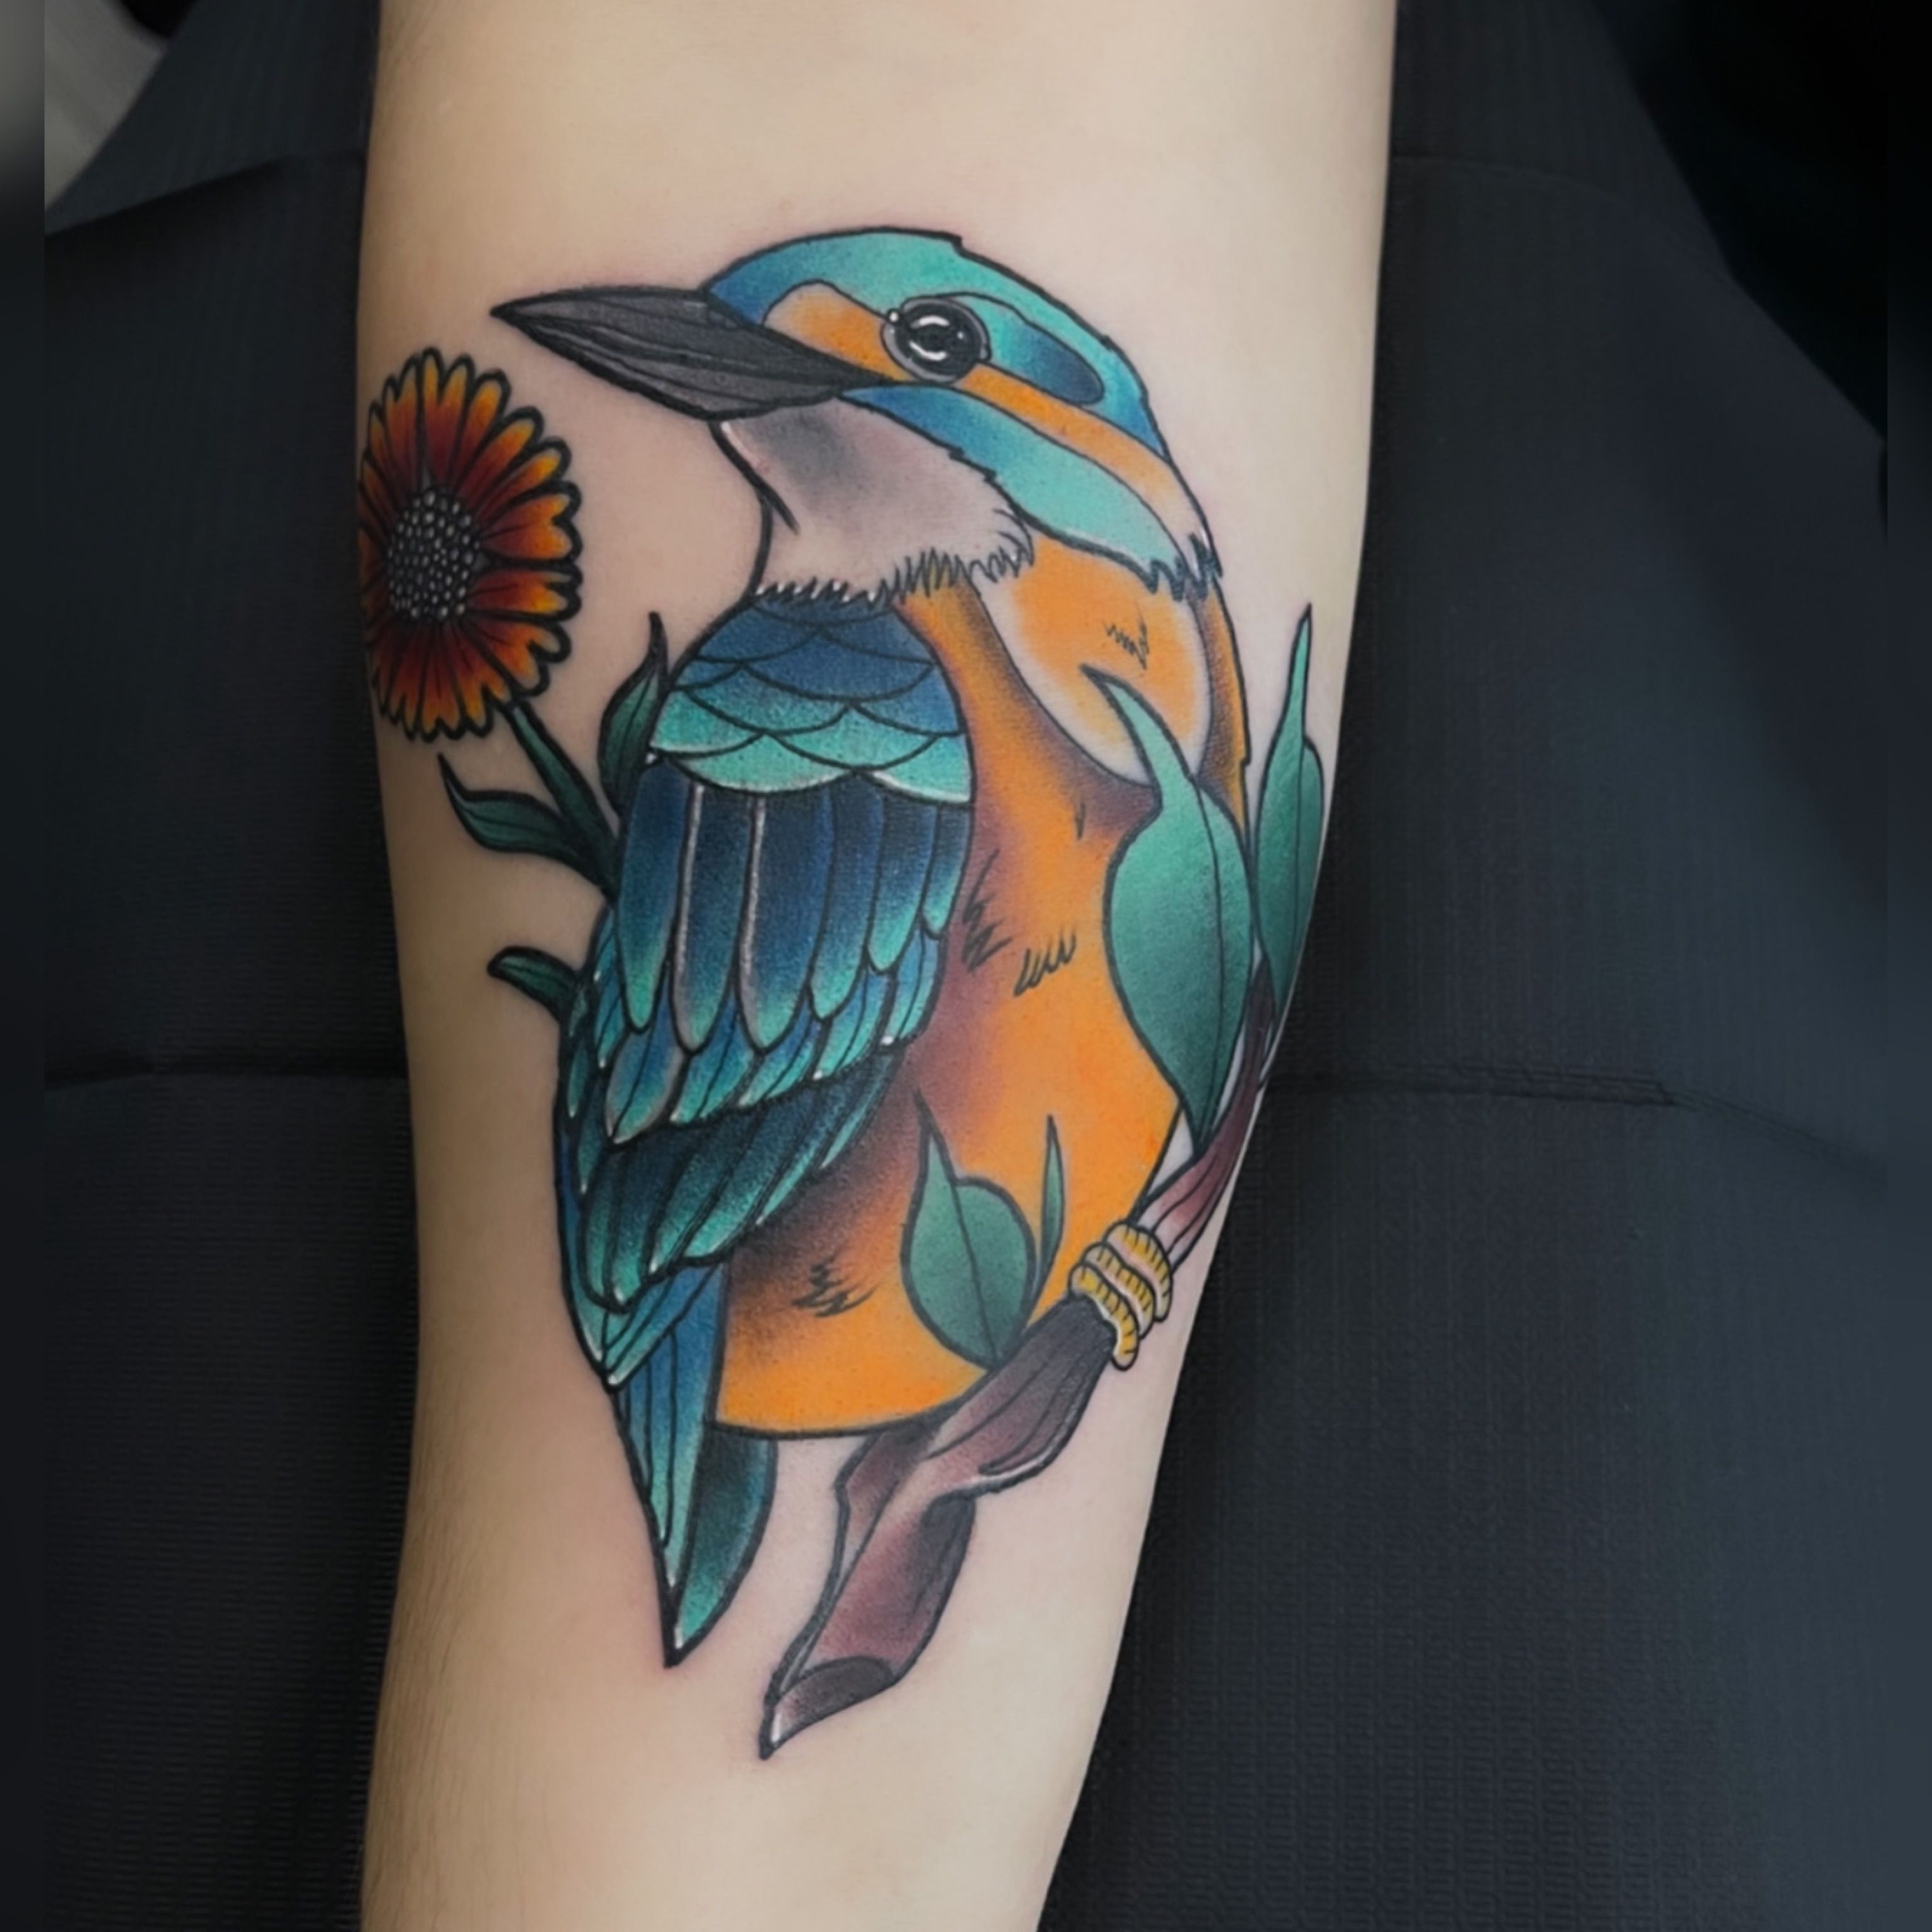 Freehand watercolor kingfisher tattoo by Mentjuh on DeviantArt